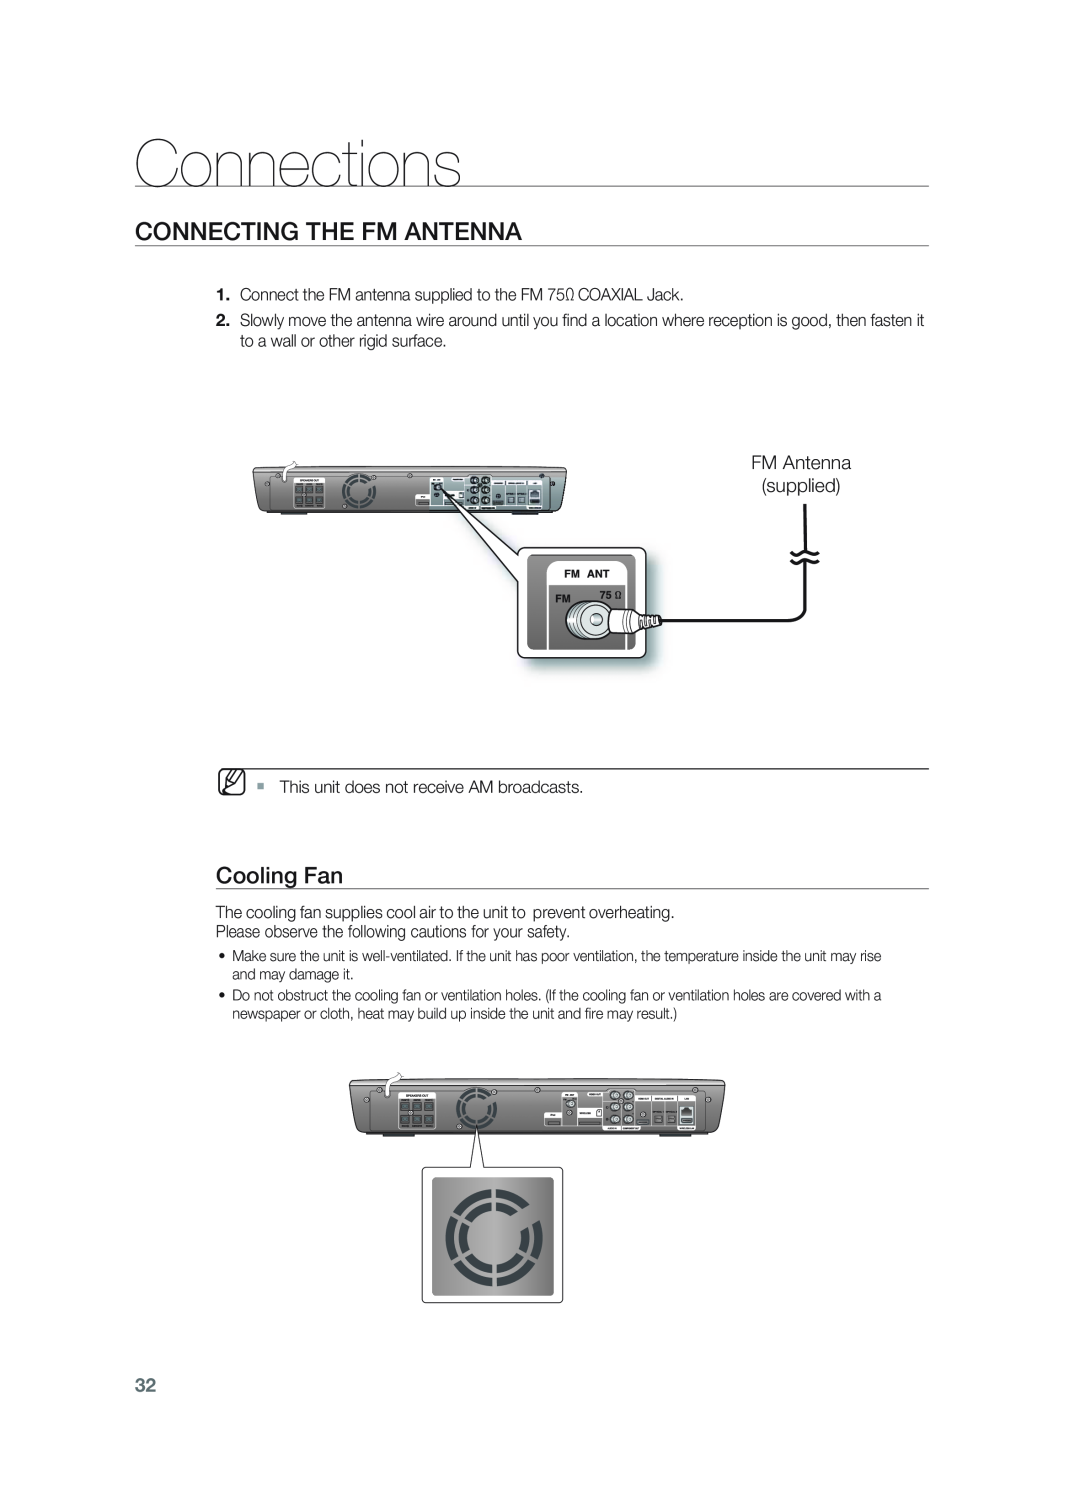 Samsung HT-BD1255, HT-BD1252 user manual Connecting The Fm Antenna, Cooling Fan, Connections 